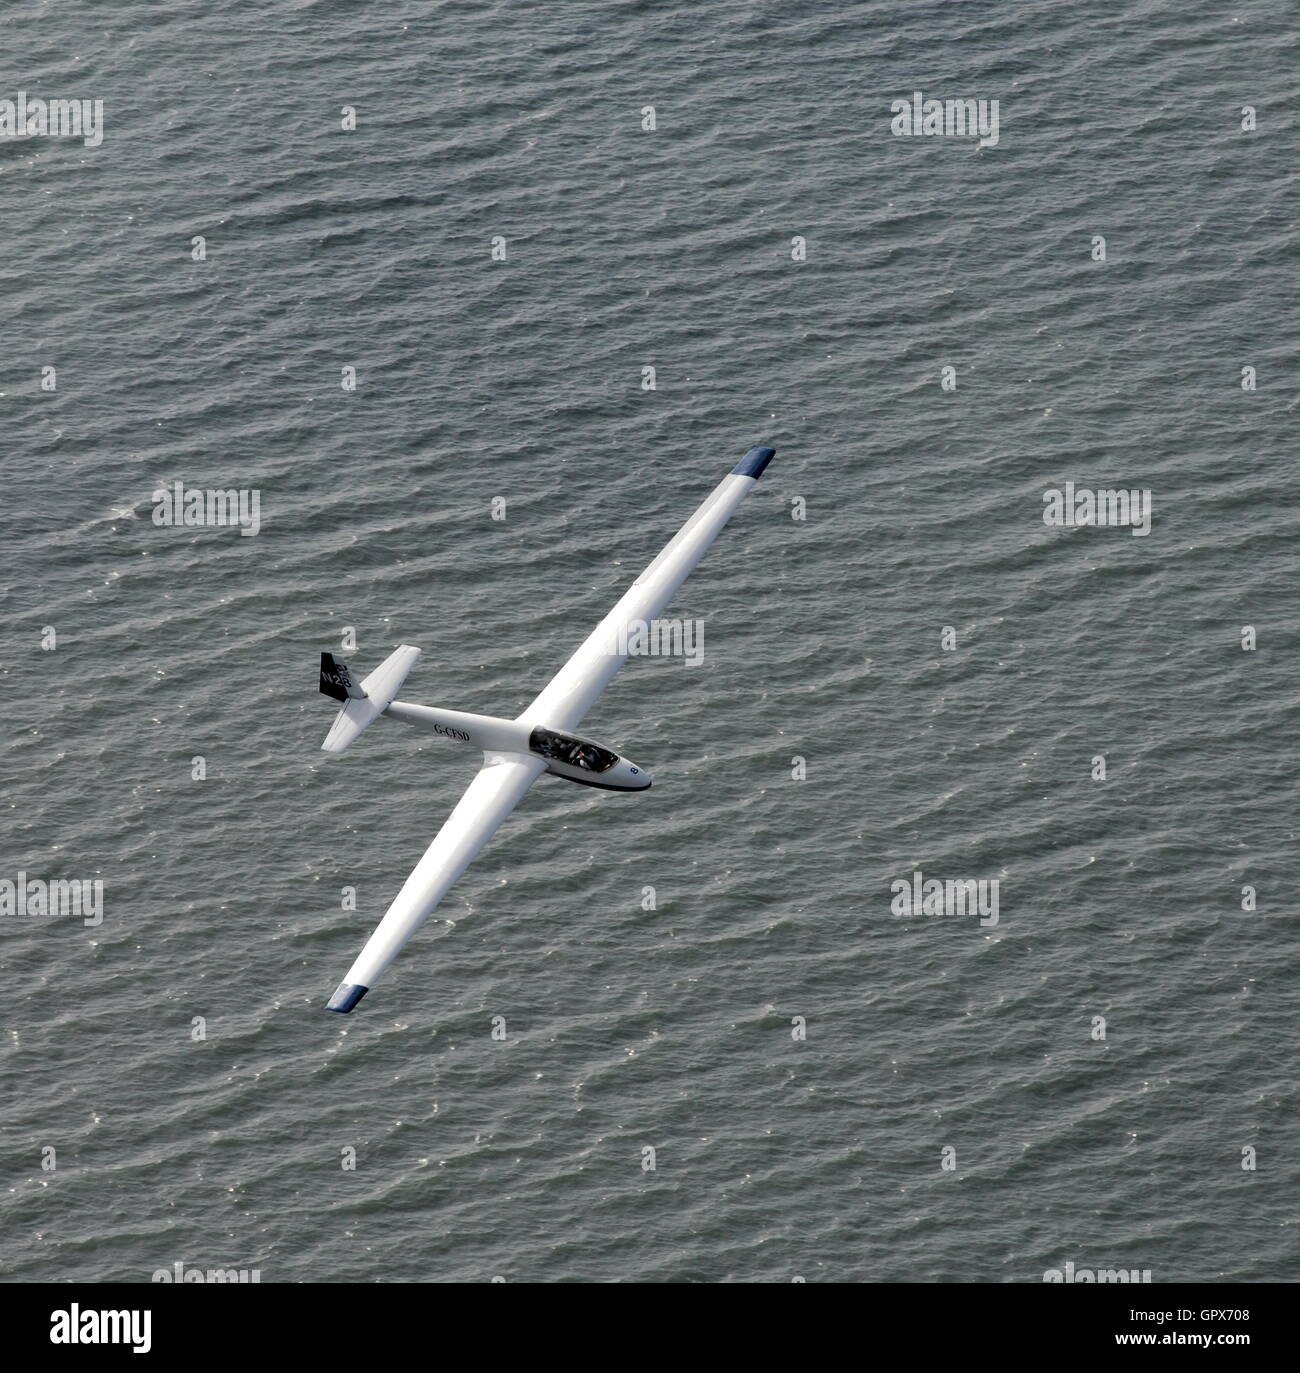 AJAXNETPHOTO. 30TH JULY, 2011. LEE-ON-THE-SOLENT, ENGLAND. - SOARING OVER THE SEA - A PNGC GLIDER FROM DAEDALUS AIRFIELD SOARS OVER A RIPPLING SOLENT SEA.  PHOTO;JONATHAN EASTLAND/AJAX REF:D2X 110209 1584 Stock Photo